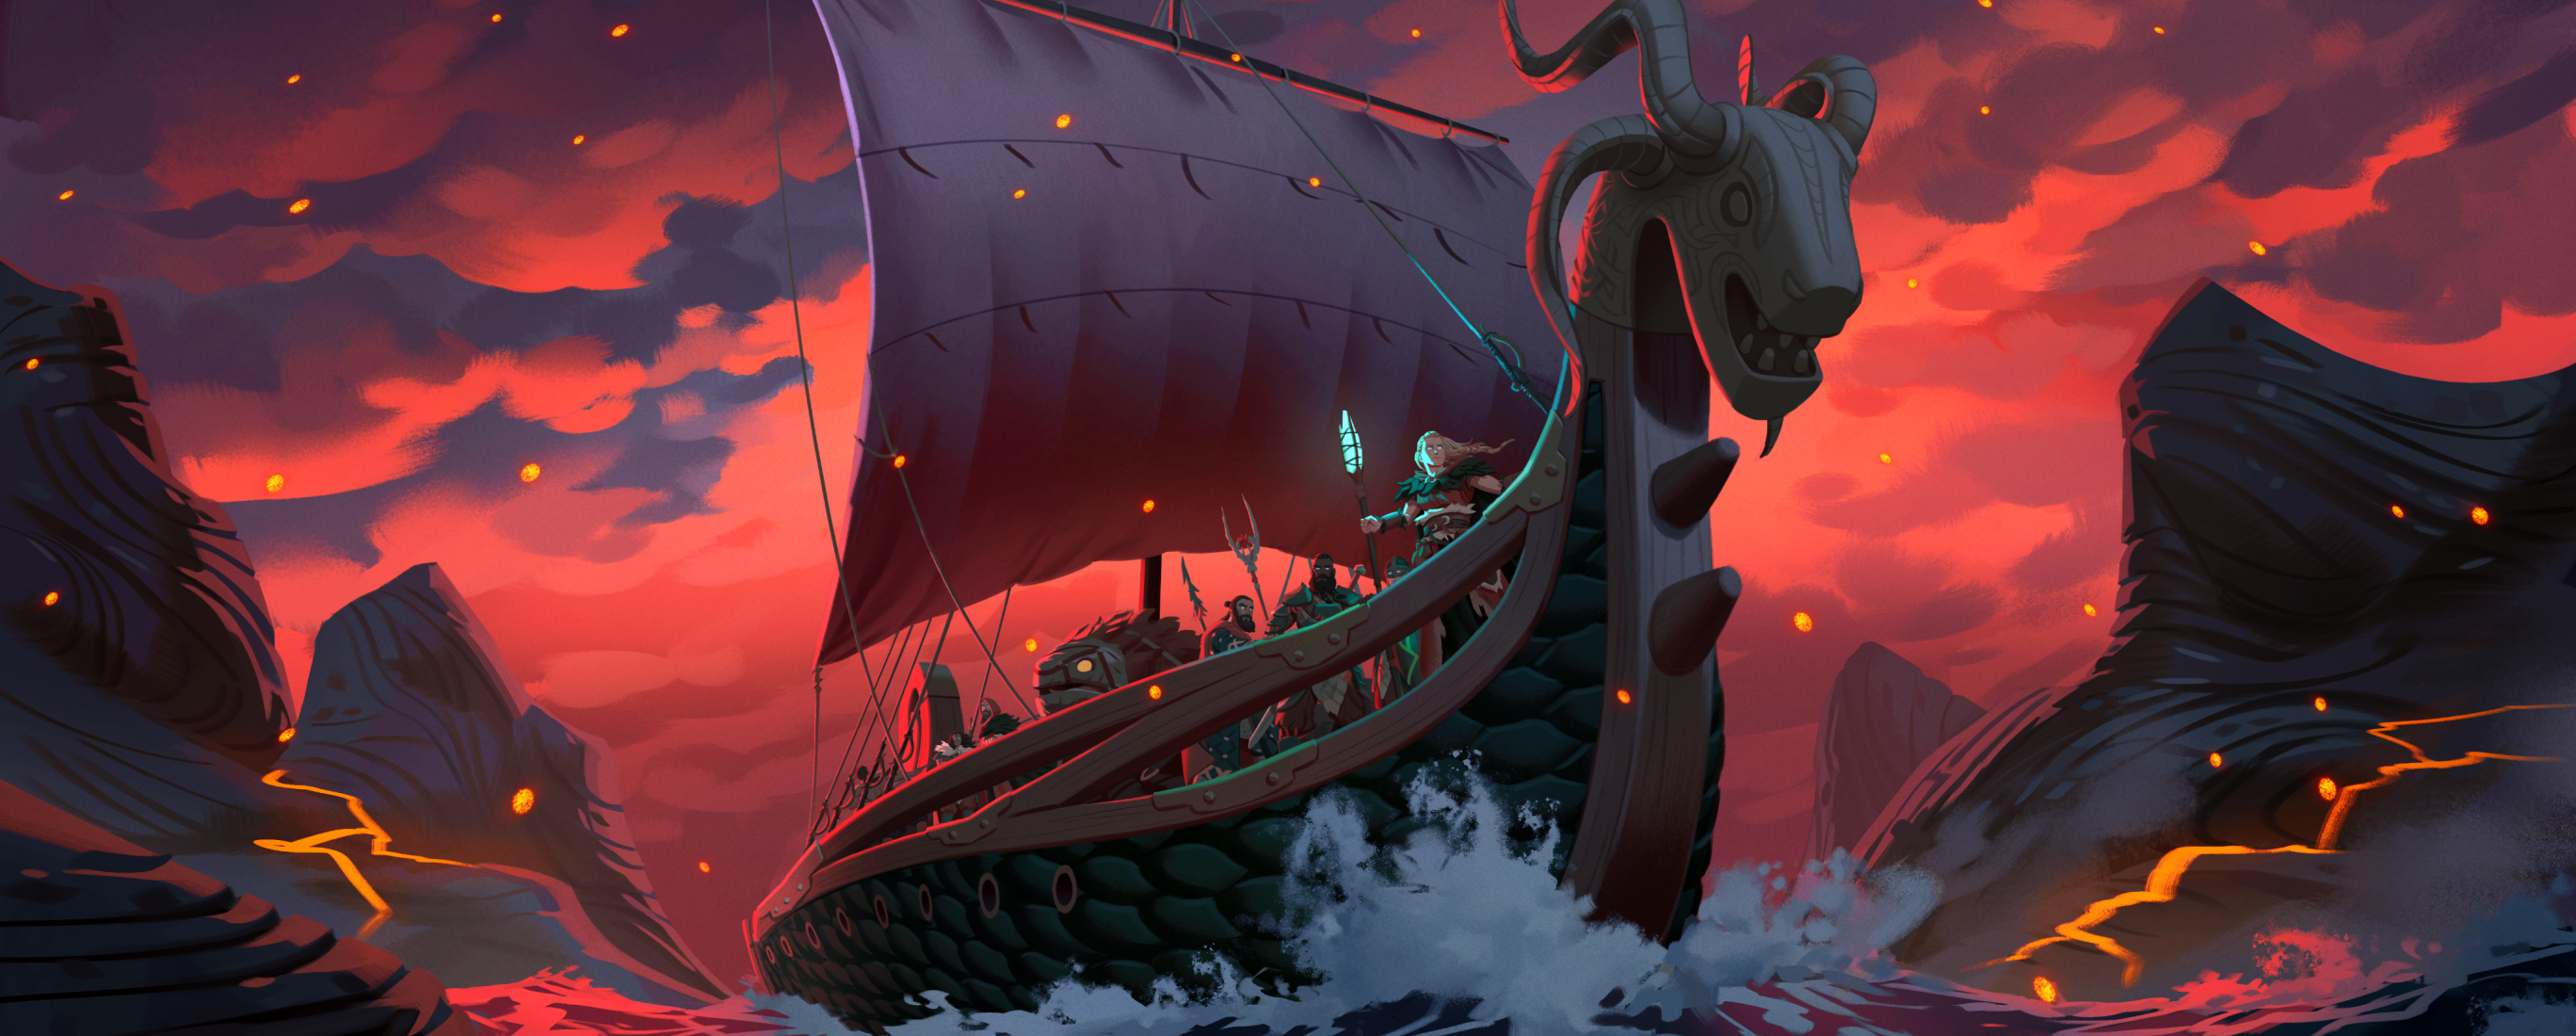 Valheim vikings sailing towards the Ashlands with volcanic magma and ash in the background